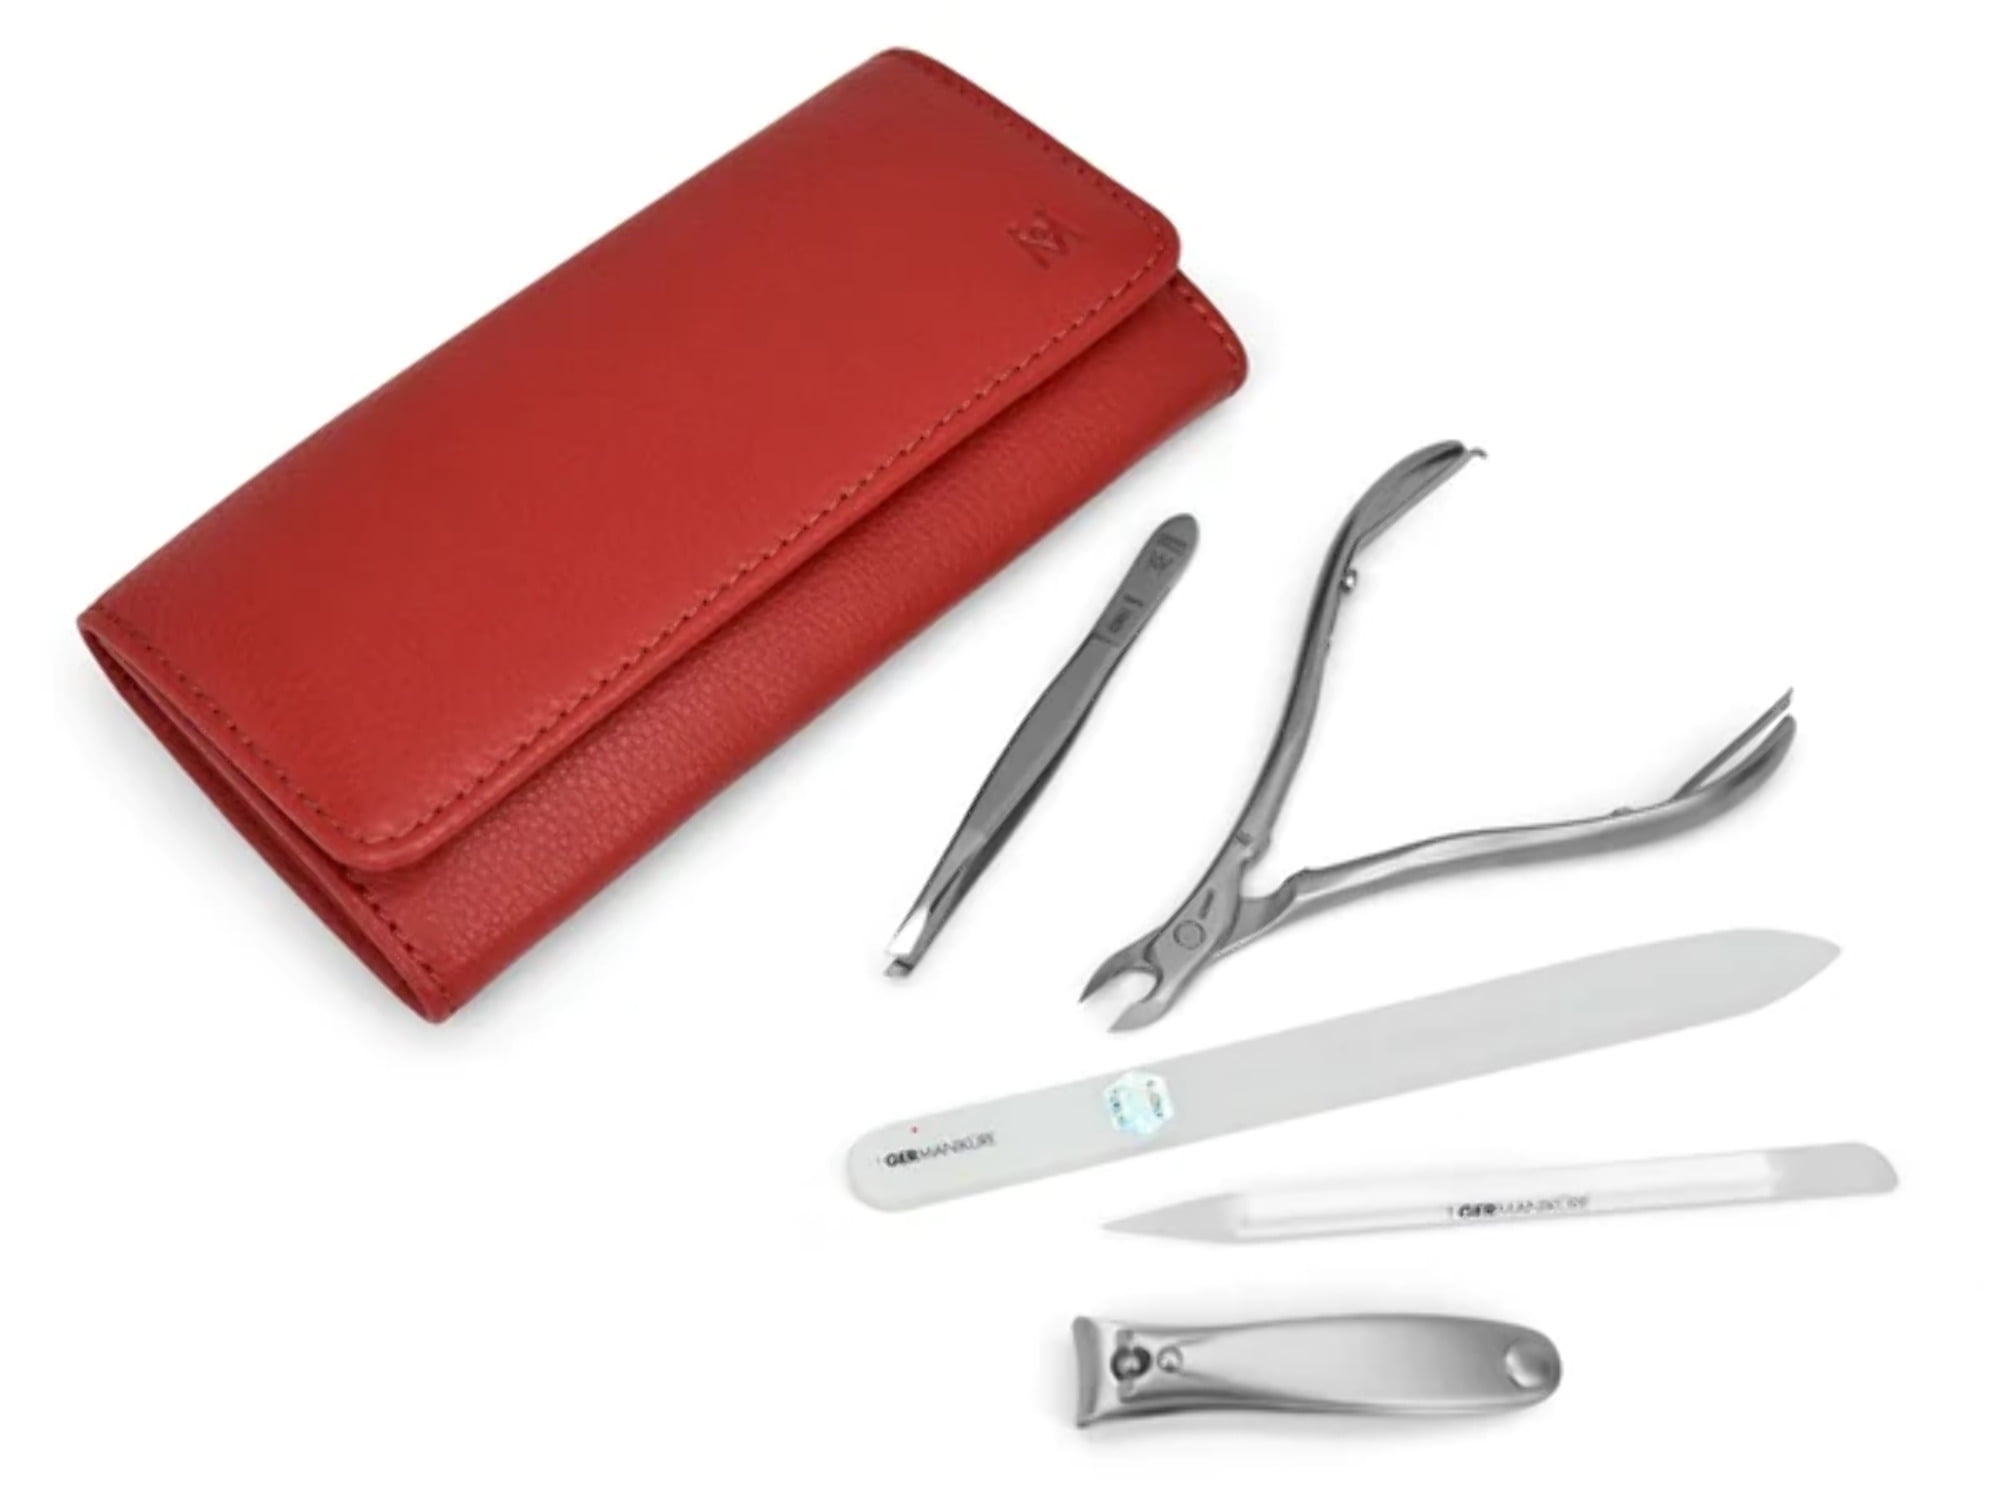 5pcs Manicure Set German FINOX Surgical Stainless Steel Cuticle Nippers Nail Clippers Tweezers Glass File and Stick 5b4ea033 e77f 48aa 850b c6e5f909c451.23582008889d89a9adb6e1eac9d7a82e